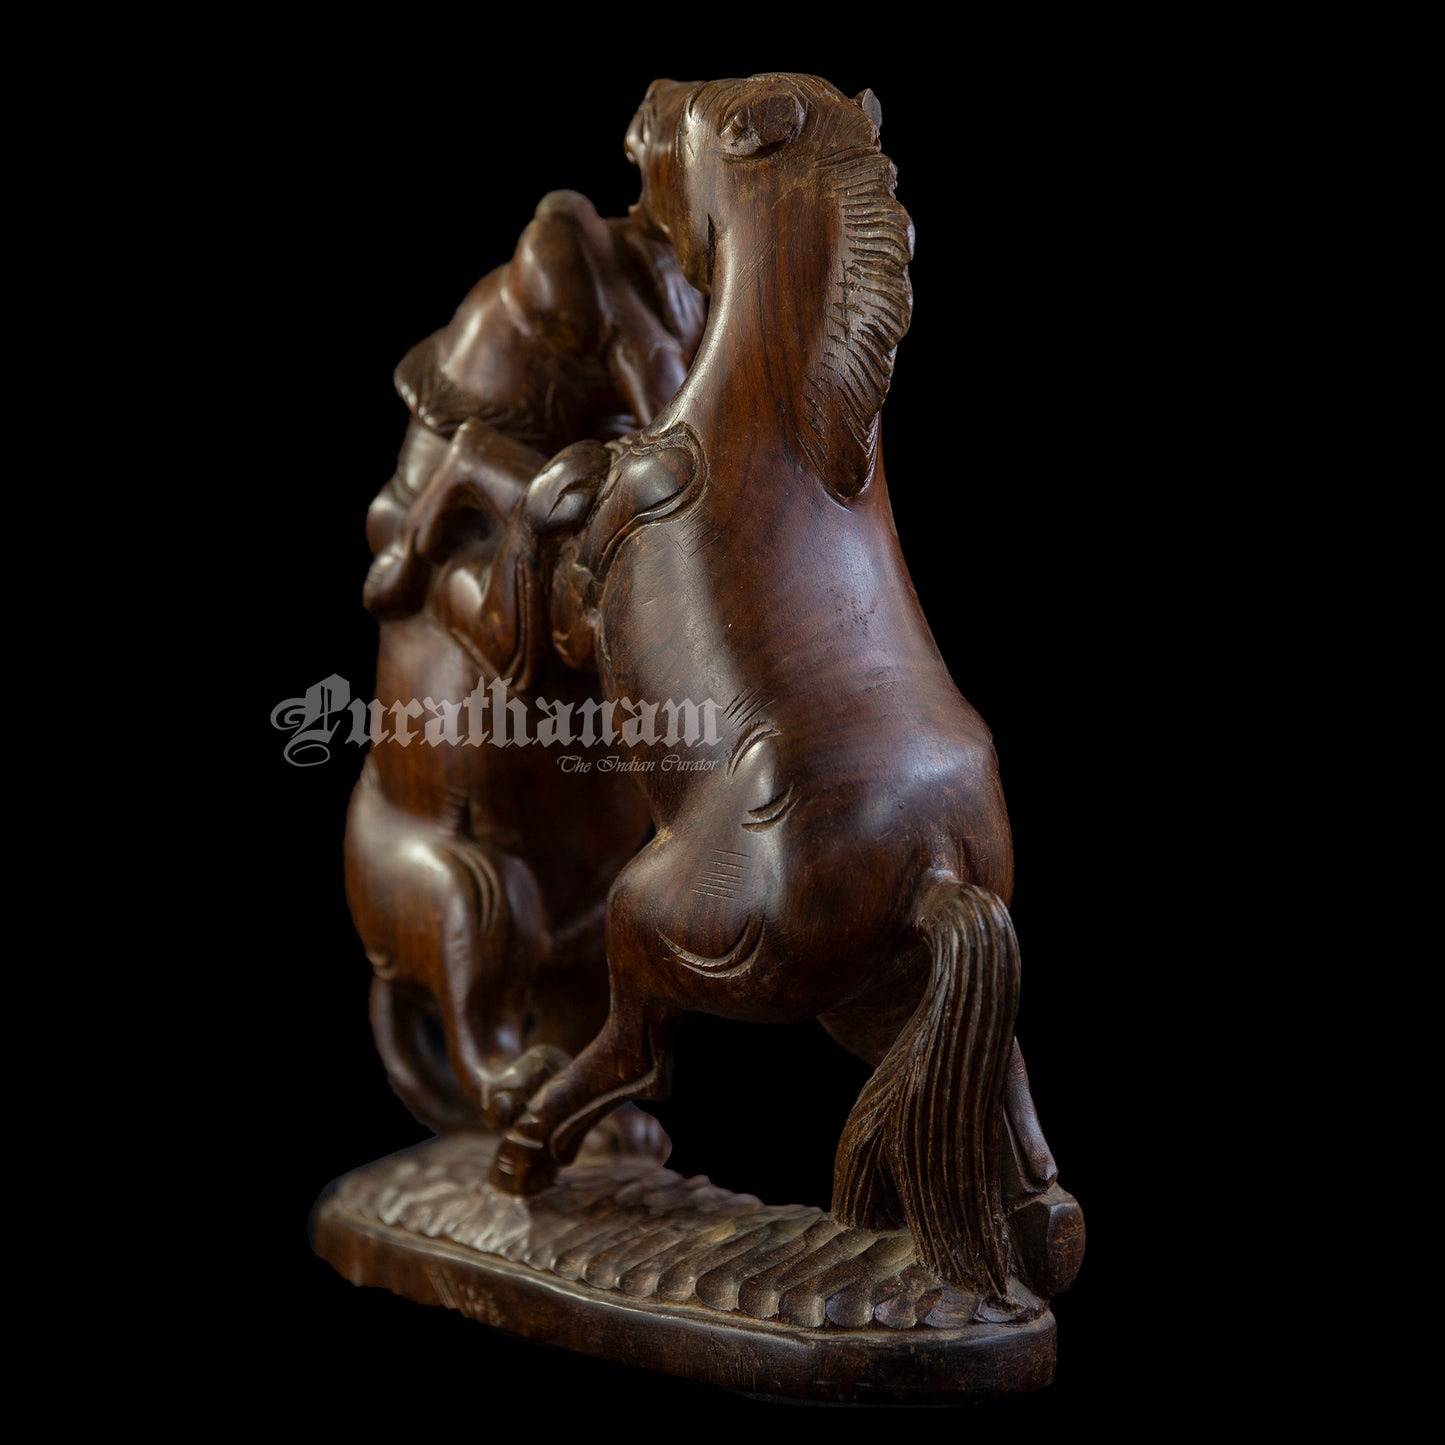 Horse Lion fight Wooden Sculpture- Rose wood (made of single block)